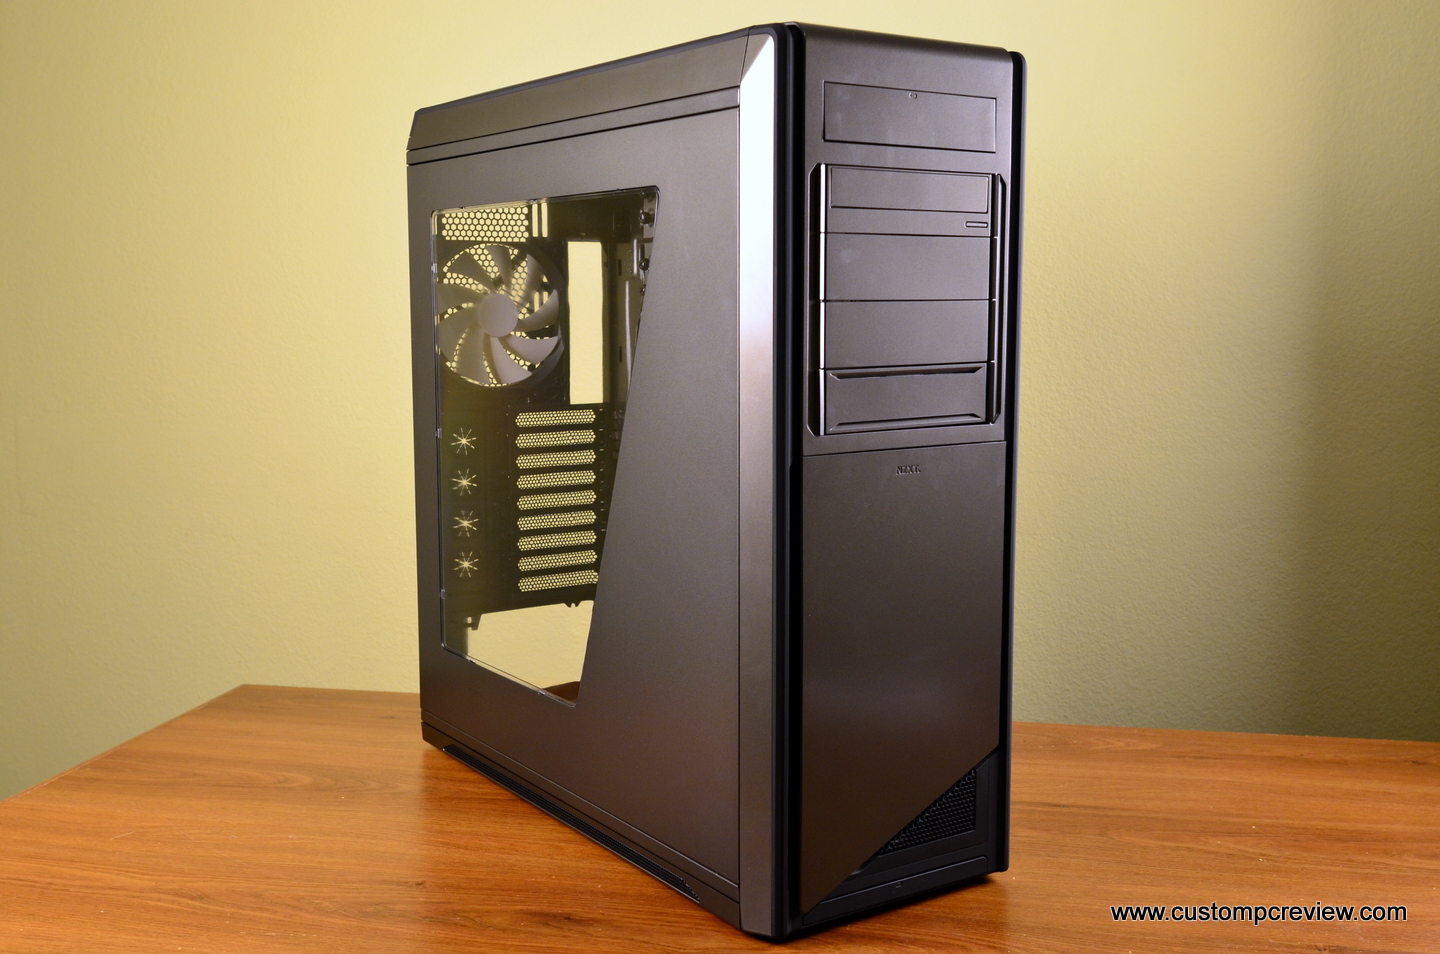 nzxt-switch-810-review-001.jpg